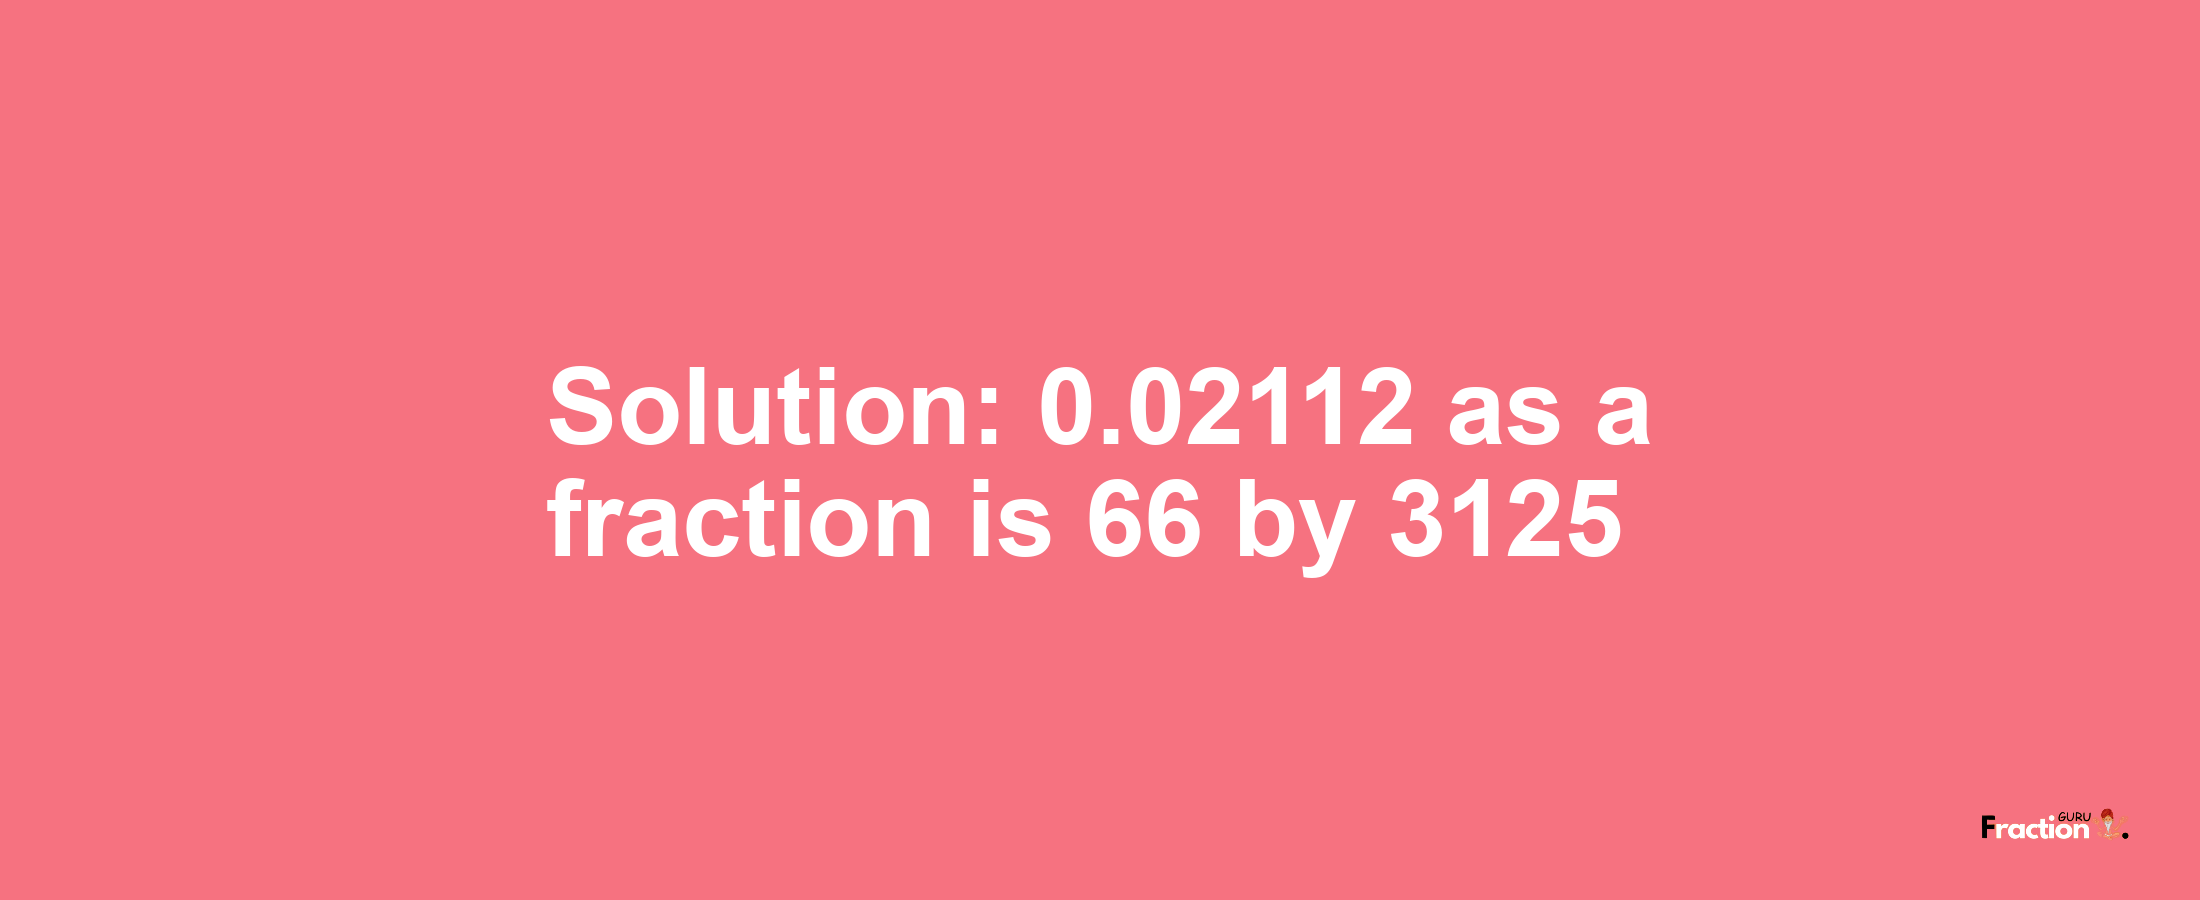 Solution:0.02112 as a fraction is 66/3125